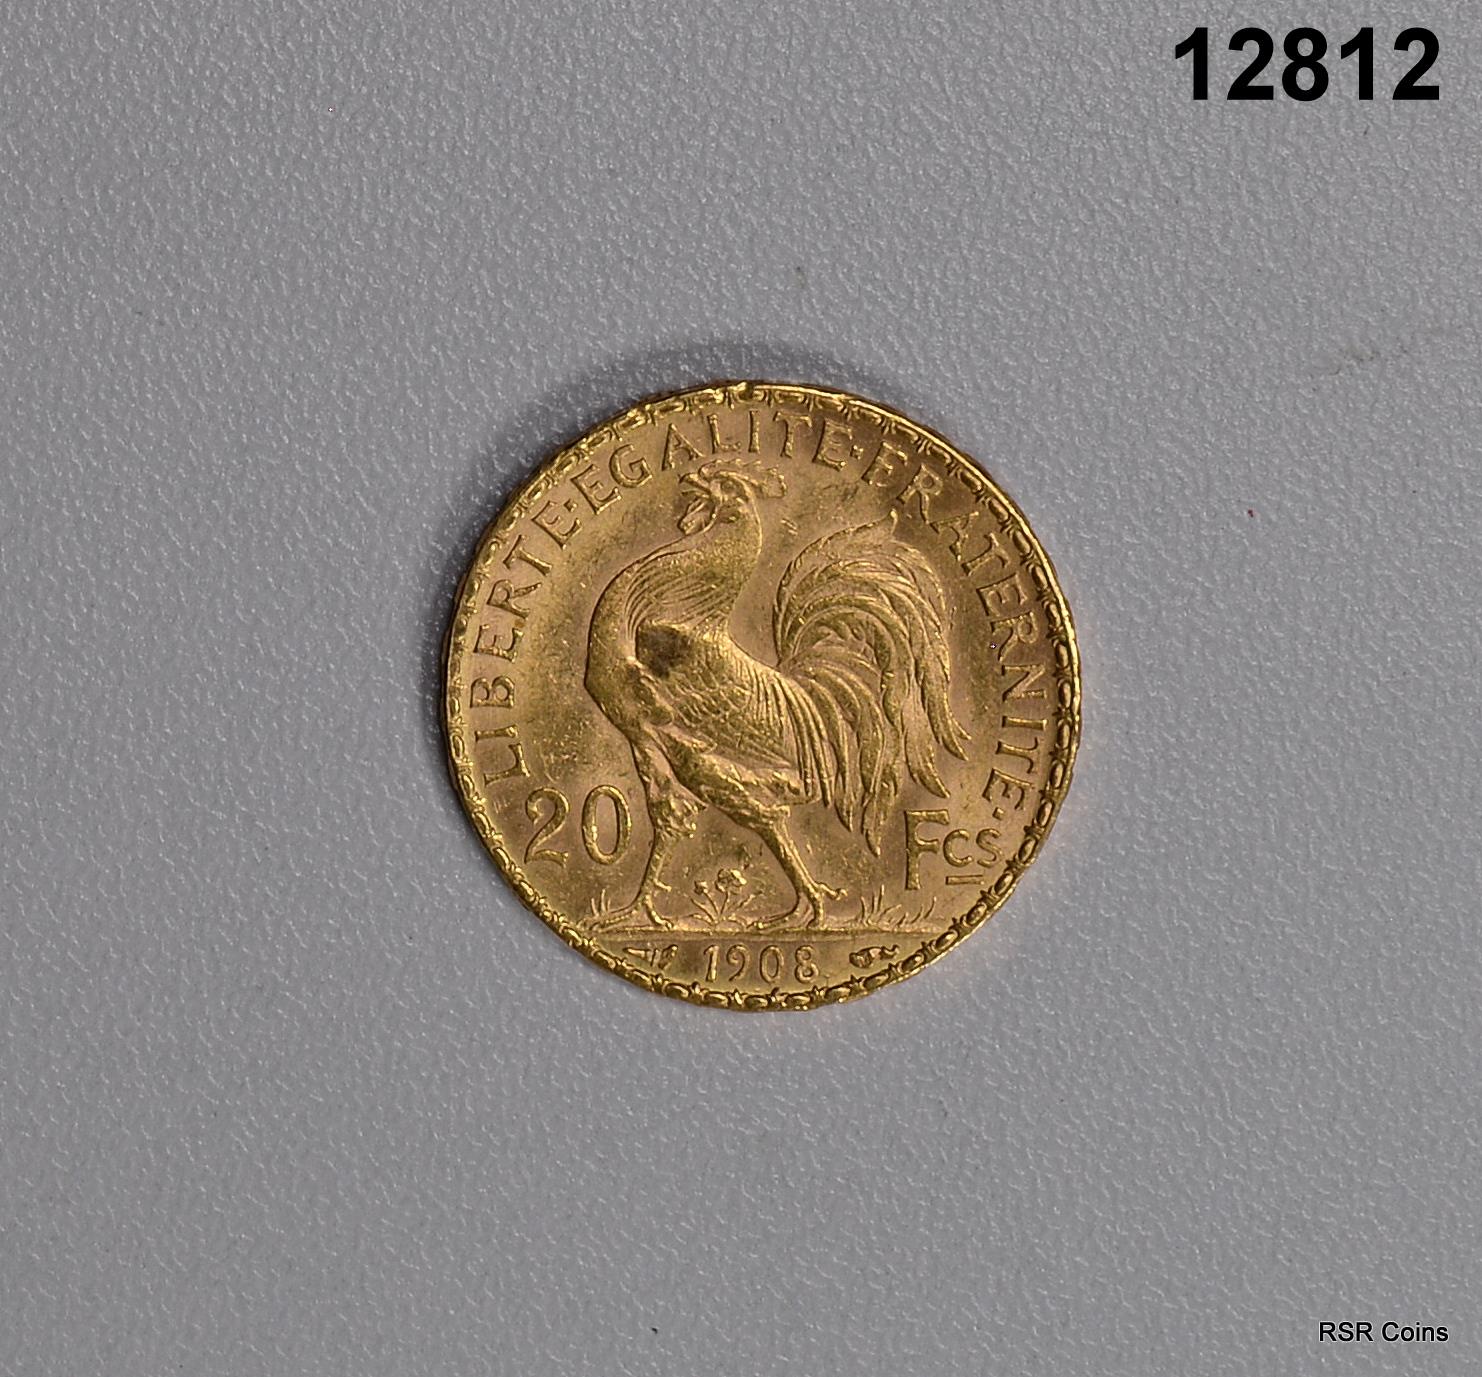 1908 FRENCH 20 FRANC BU GOLD ROOSTER! #12812